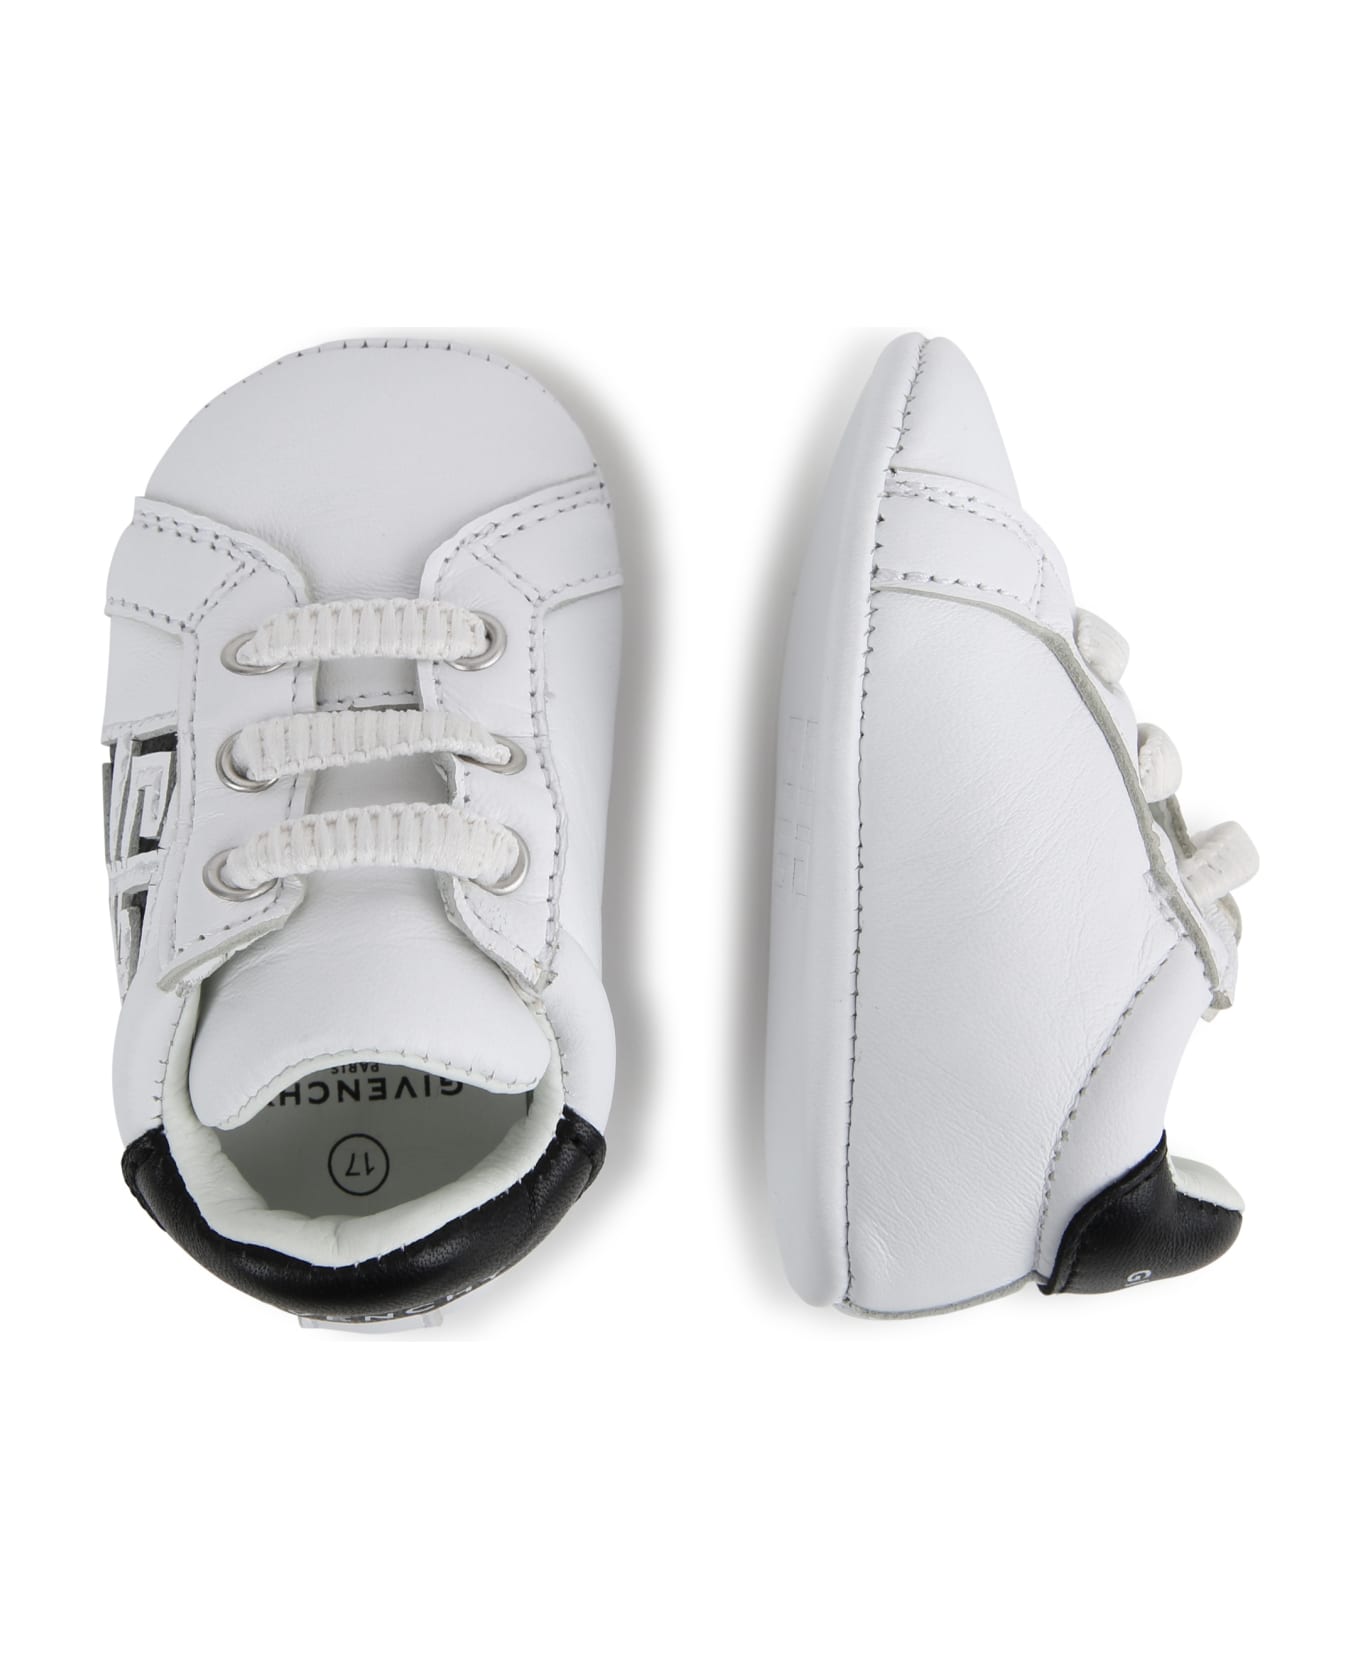 Givenchy 4g Leather Sneakers - White